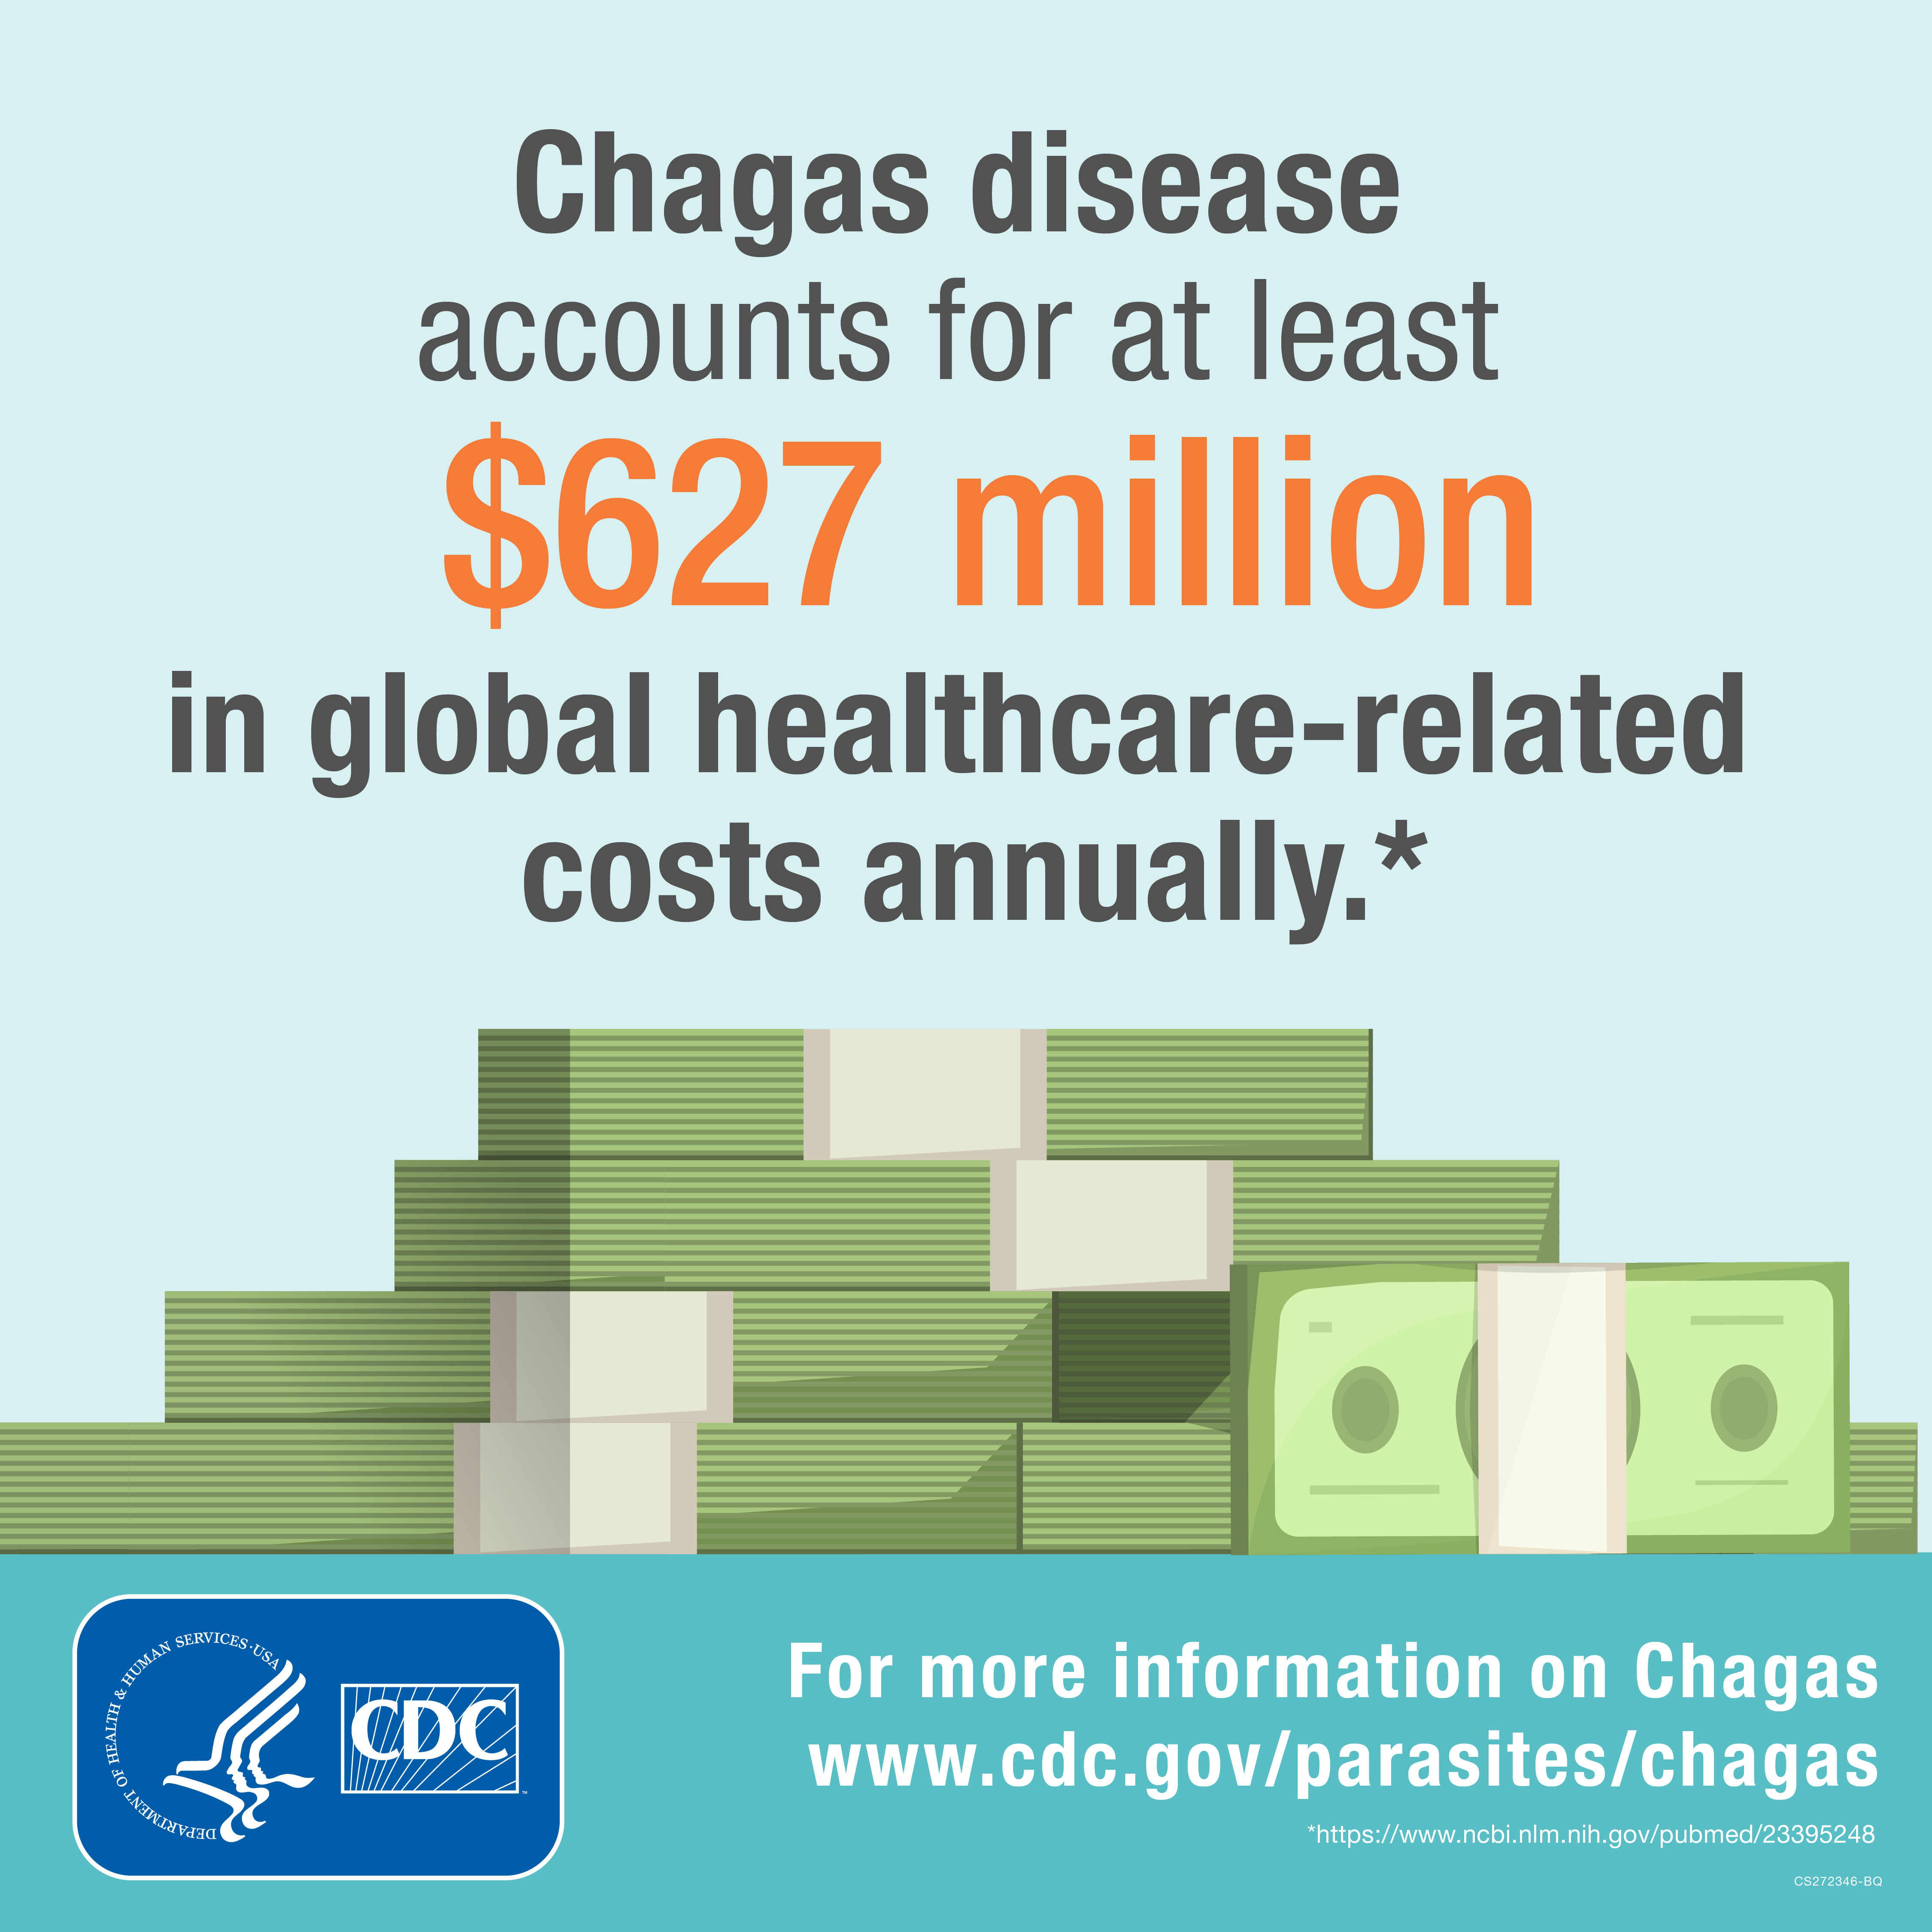 Chagas disease accounts for at least $627 million in global healthcare-related costs annually